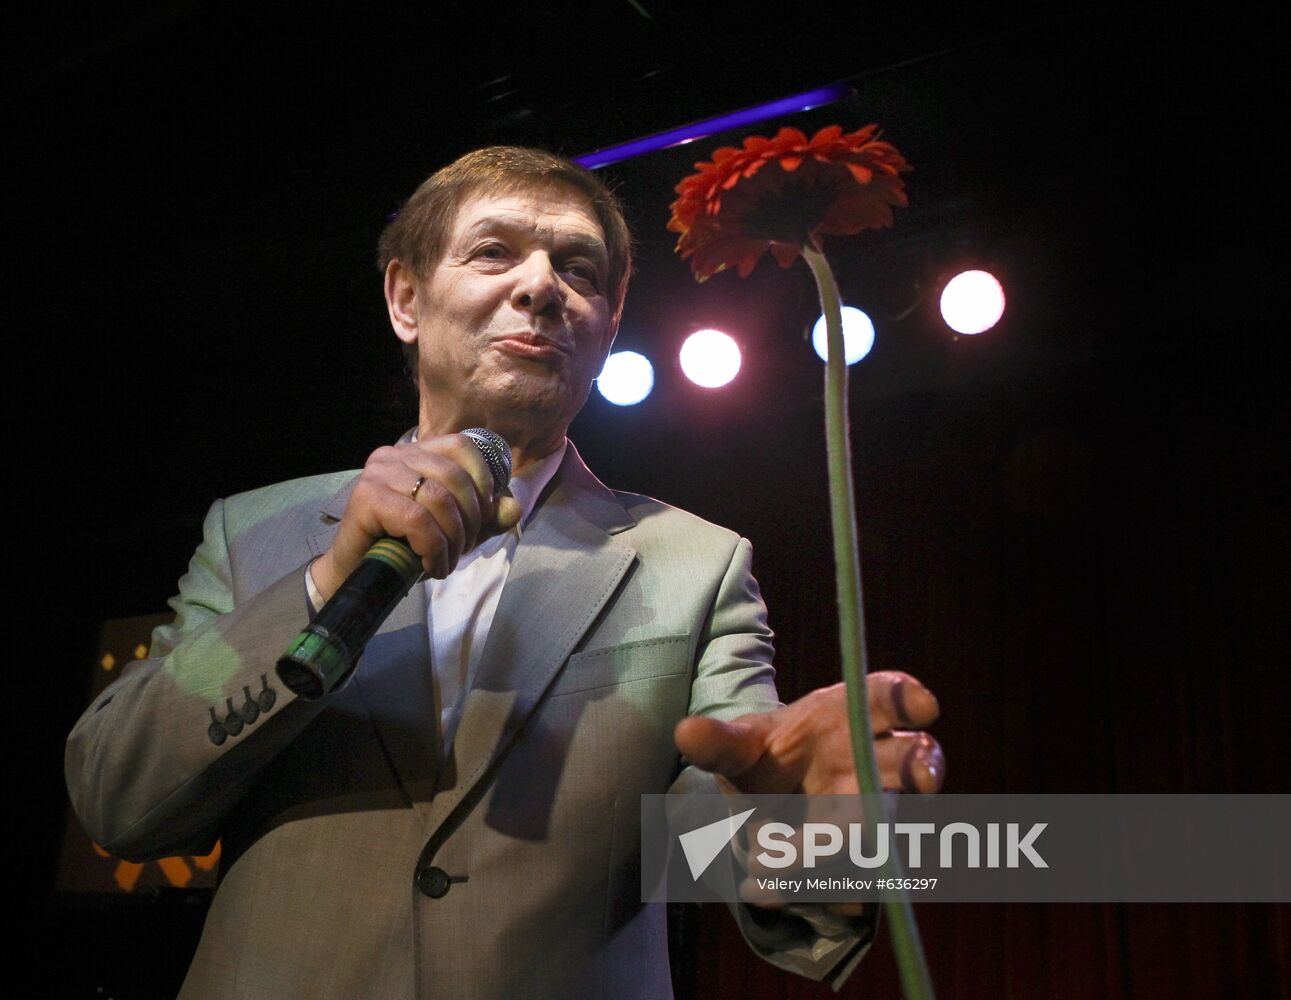 Eduard Khil in concert at 16 Tons Club